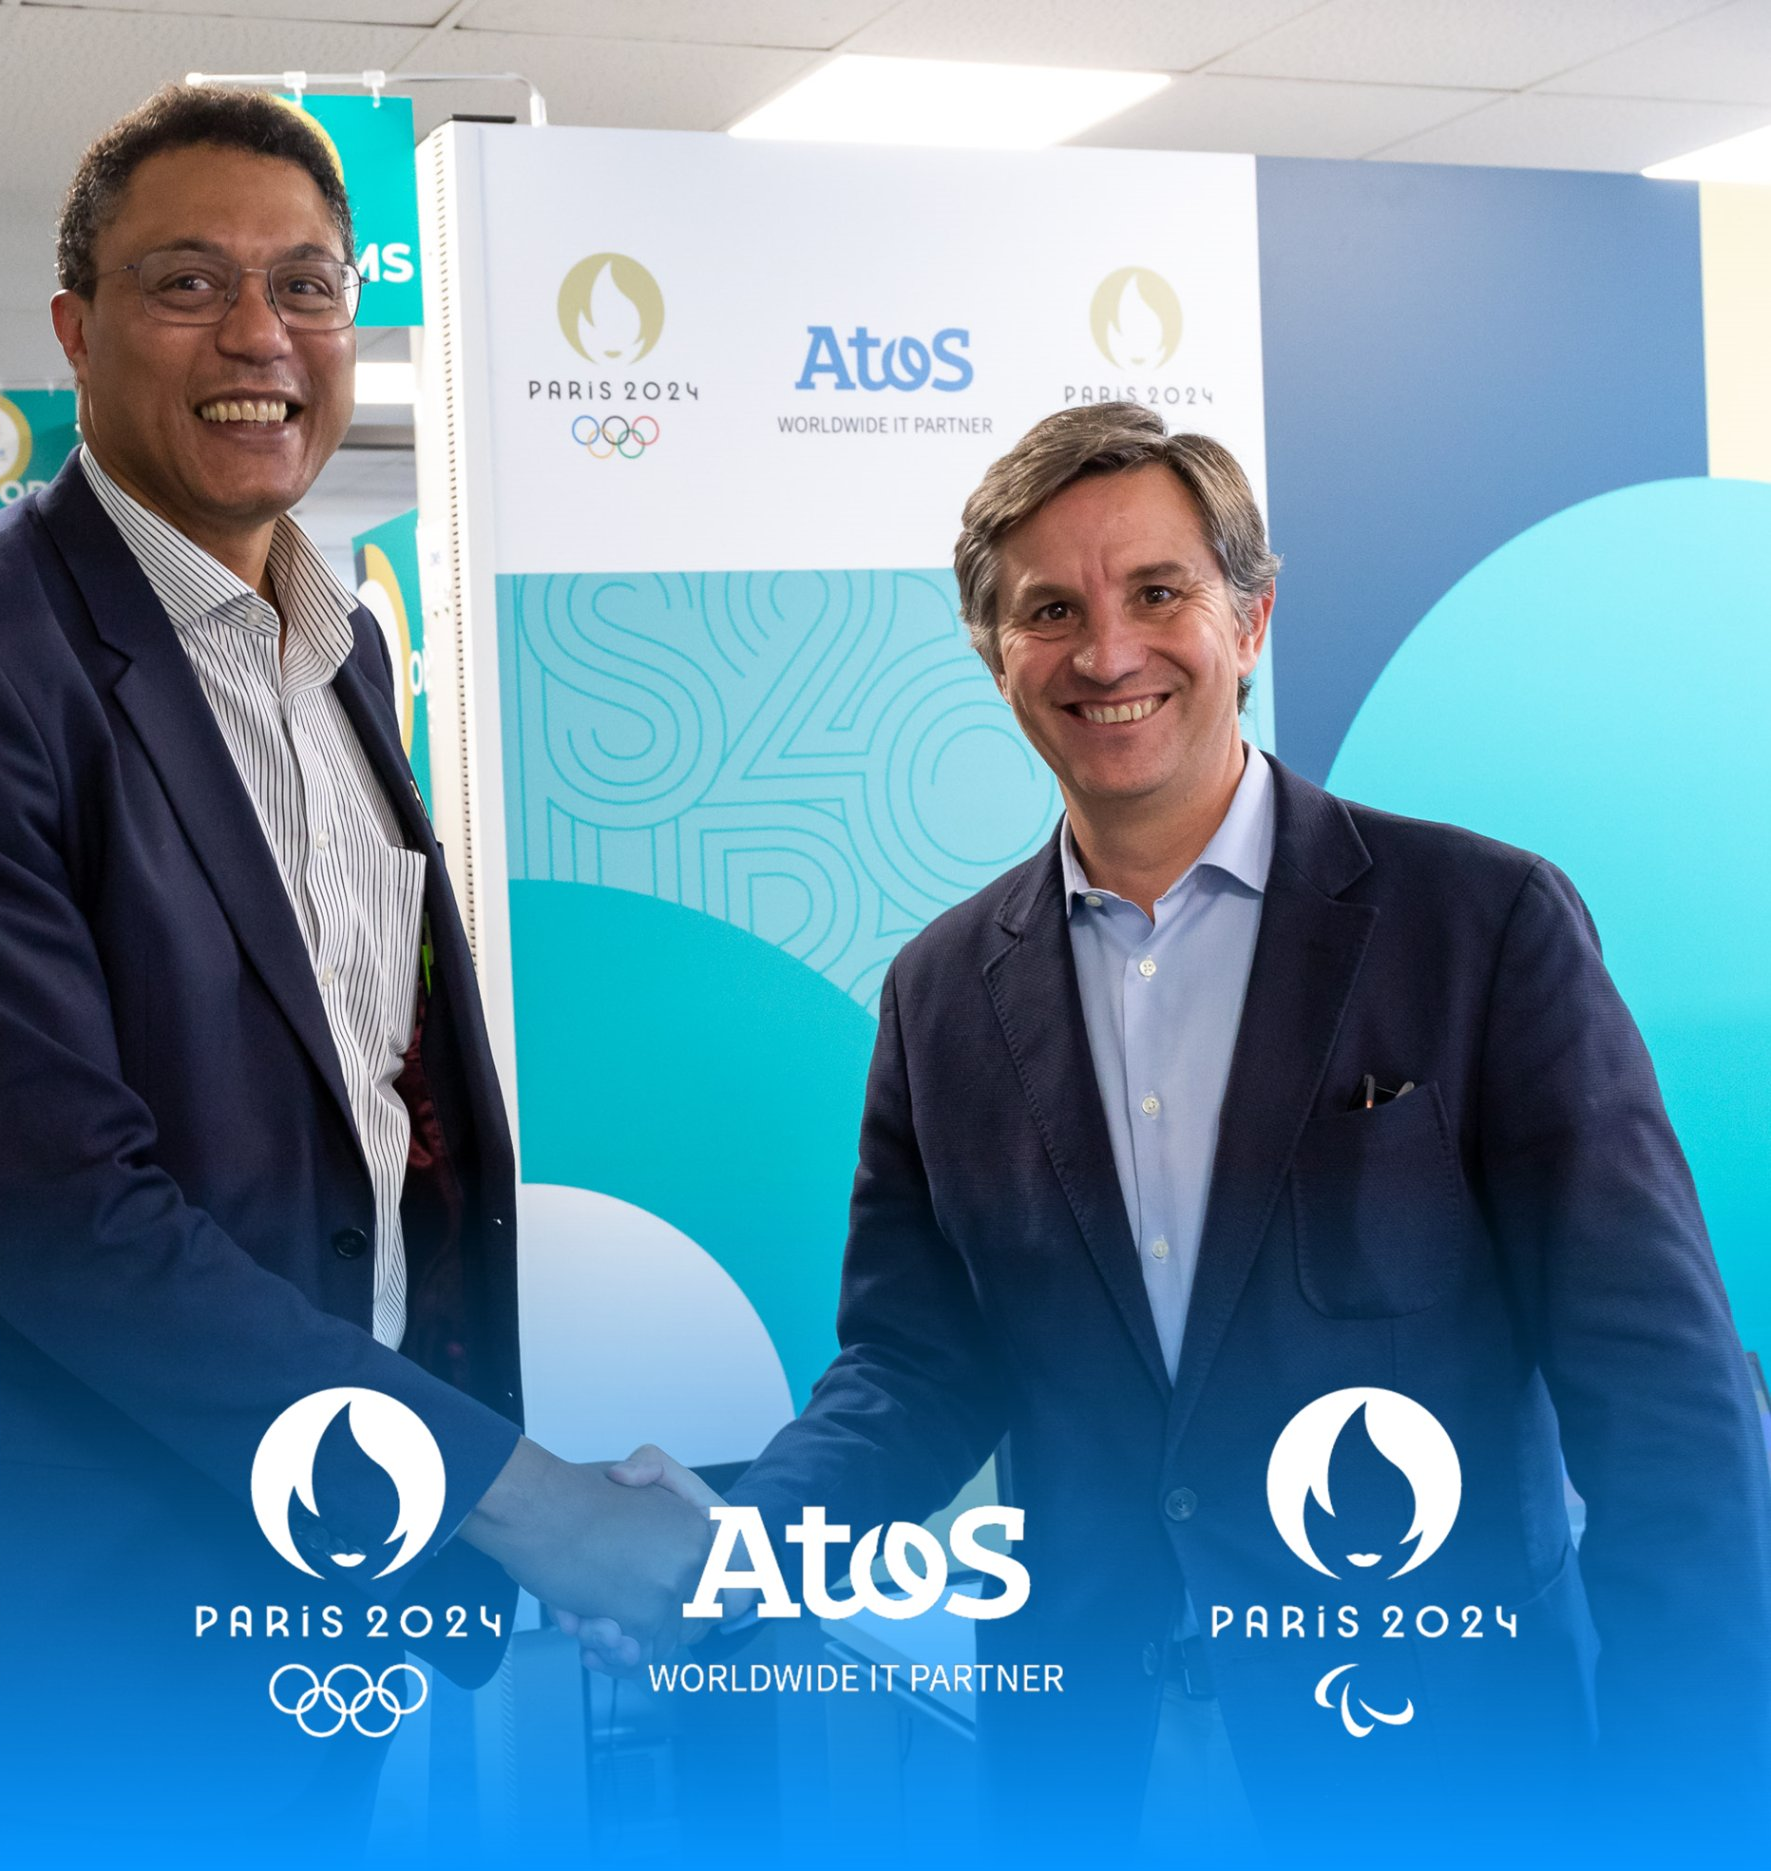 More than 250,000 hours of testing is set to be carried out before the Olympic and Paralympic Games ©Atos